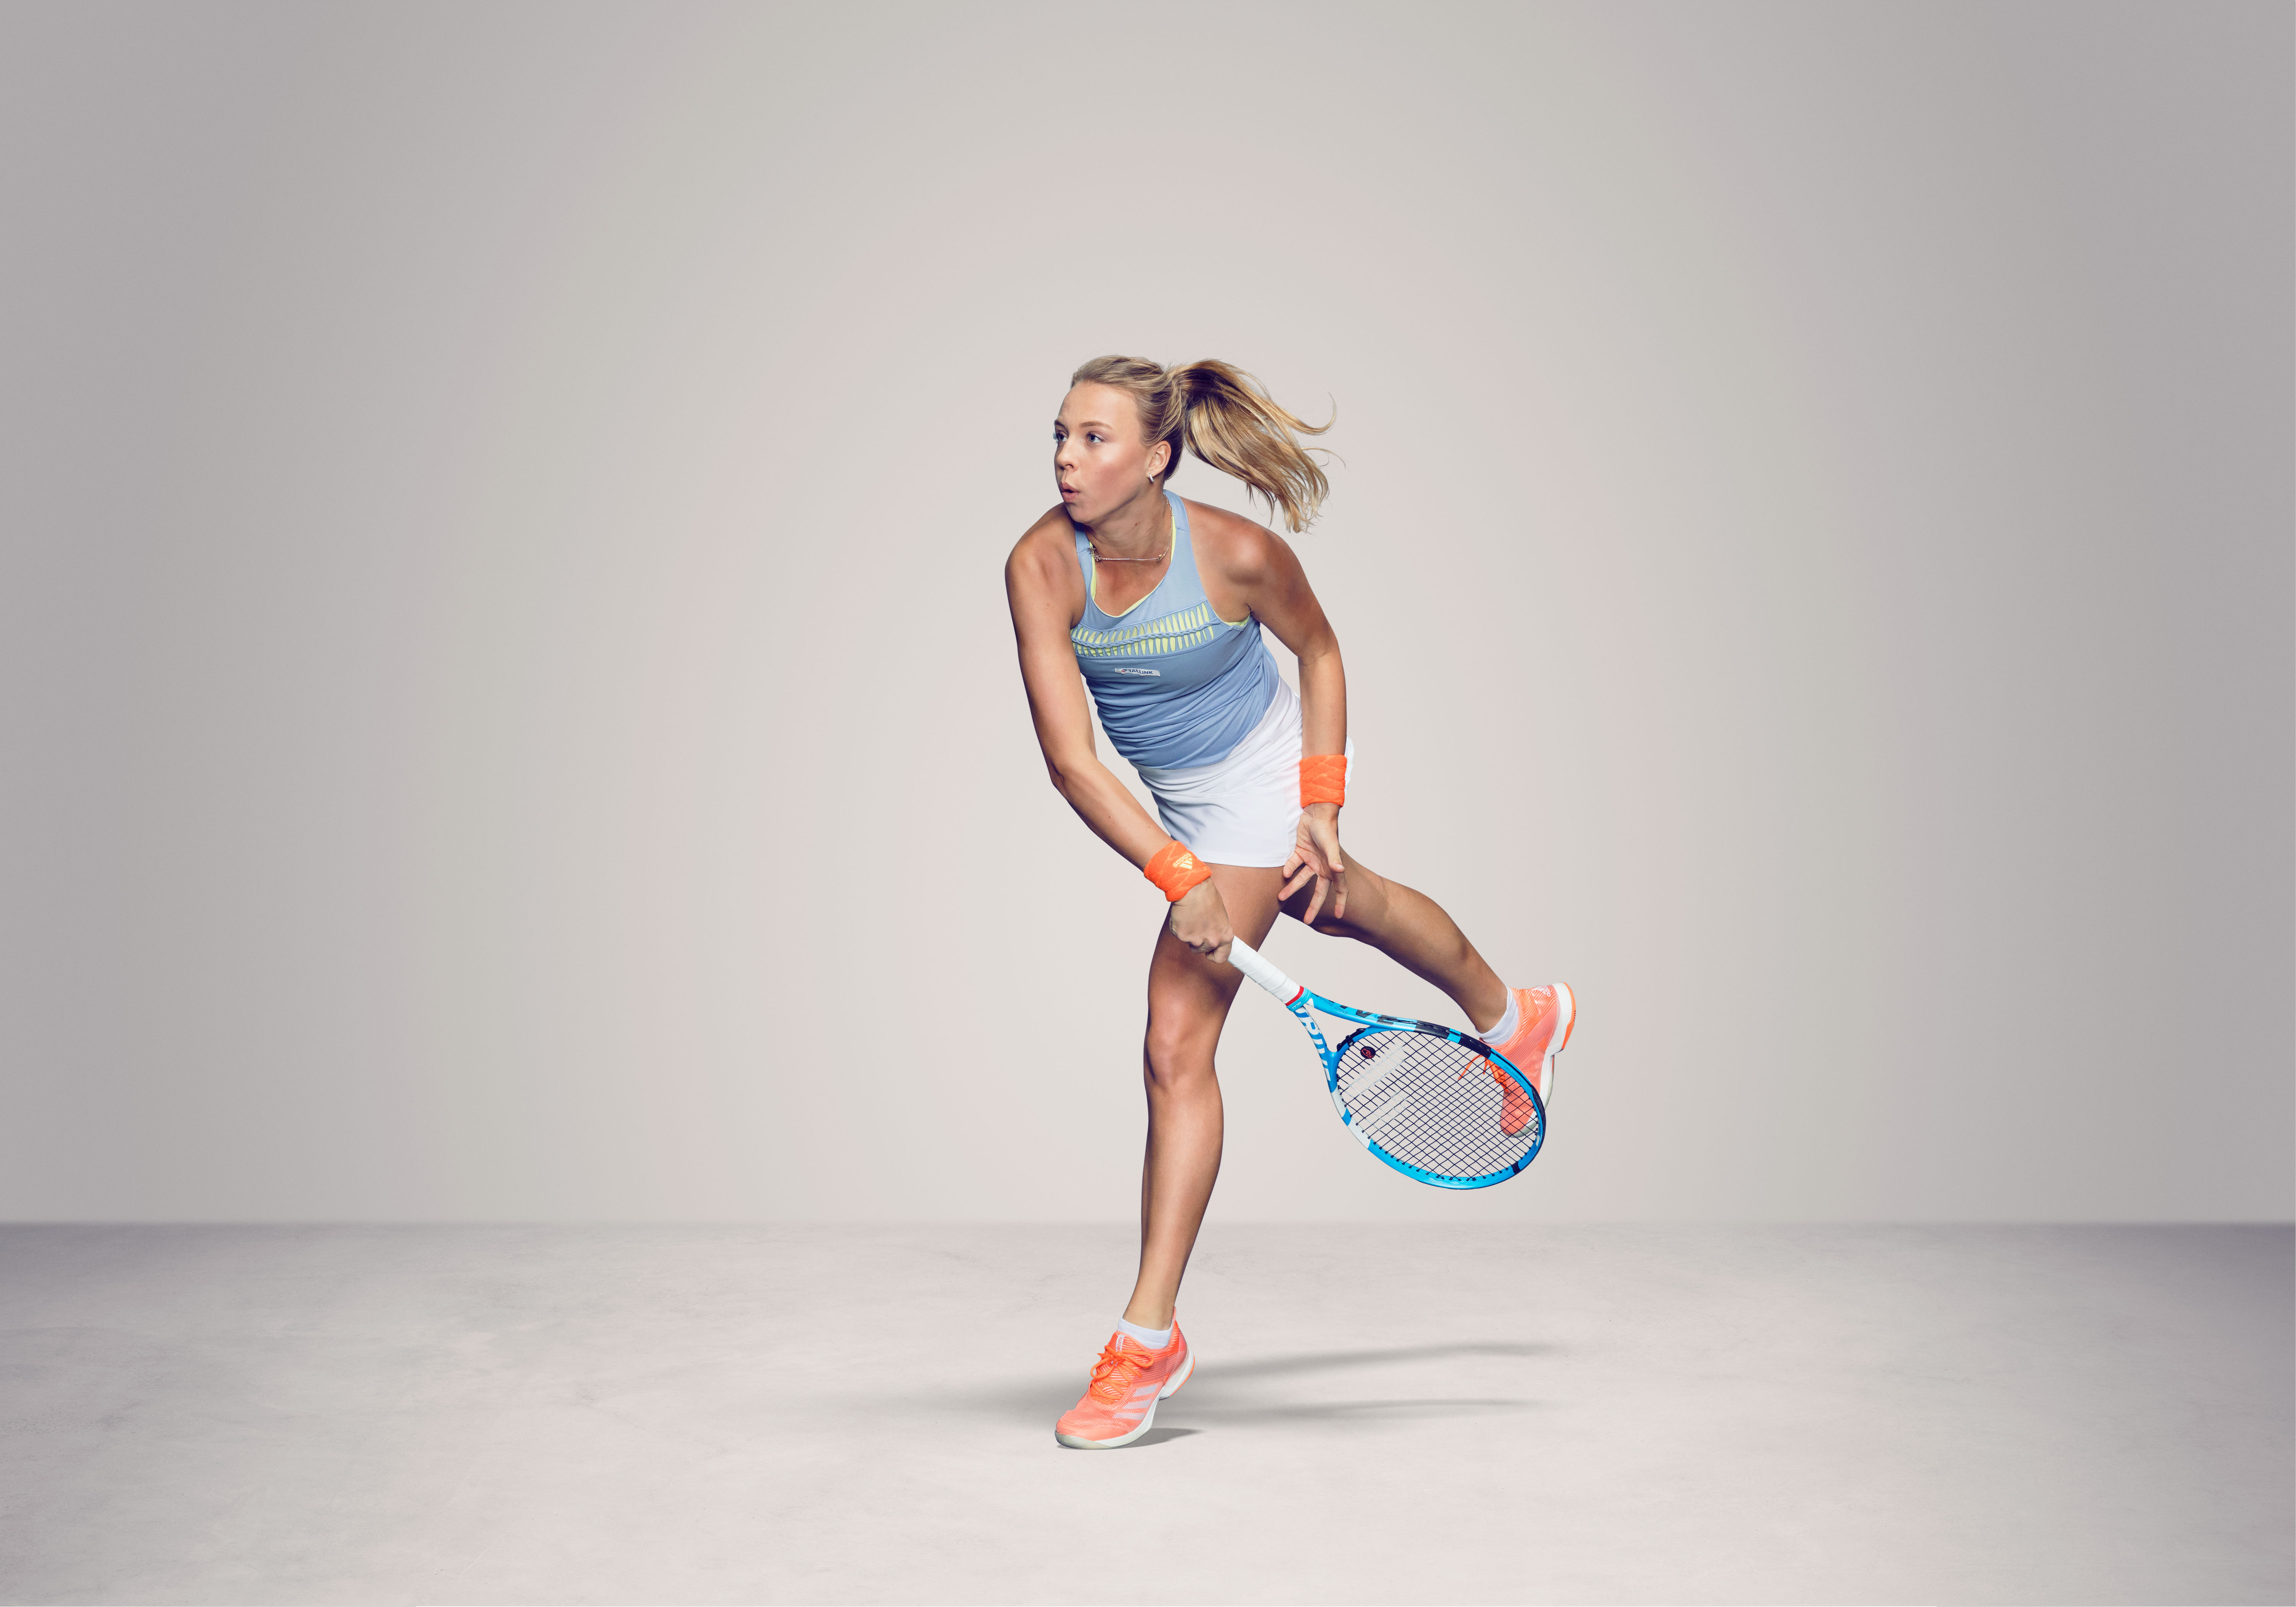 Anett Kontaveit Tablet HD picture